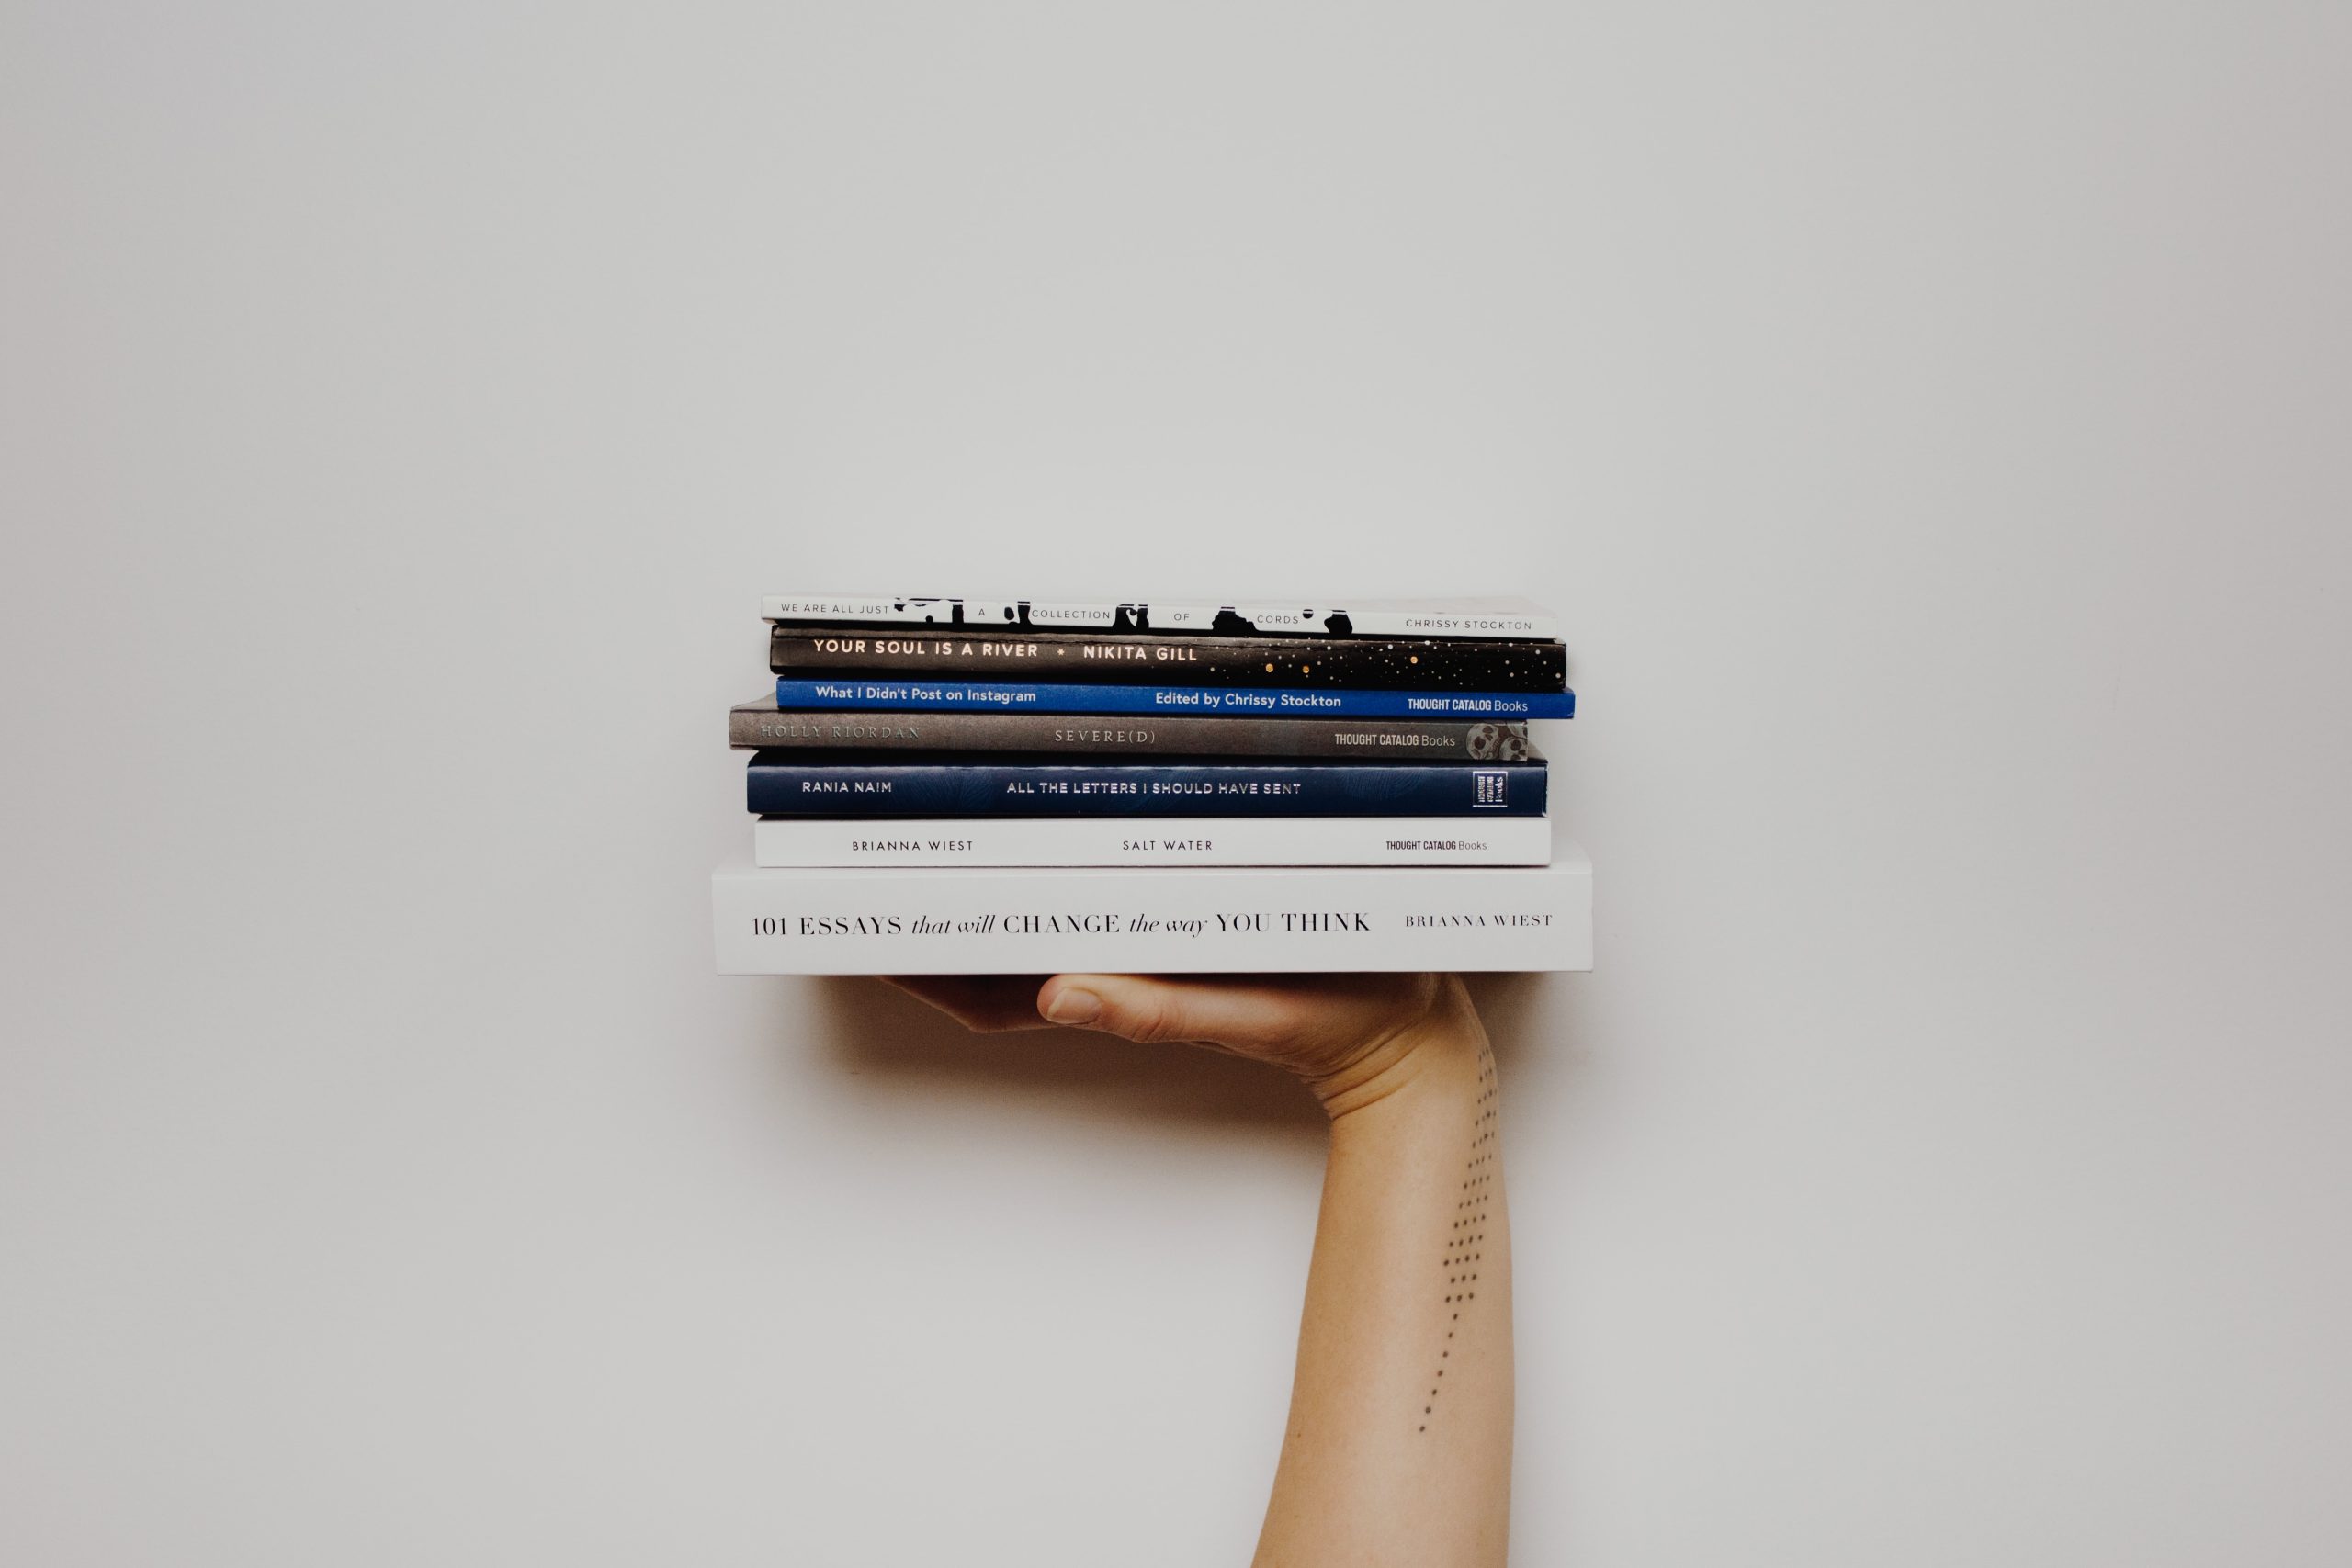 A hand holding up a small stack of books with two white books on the bottom and some darker books on top.